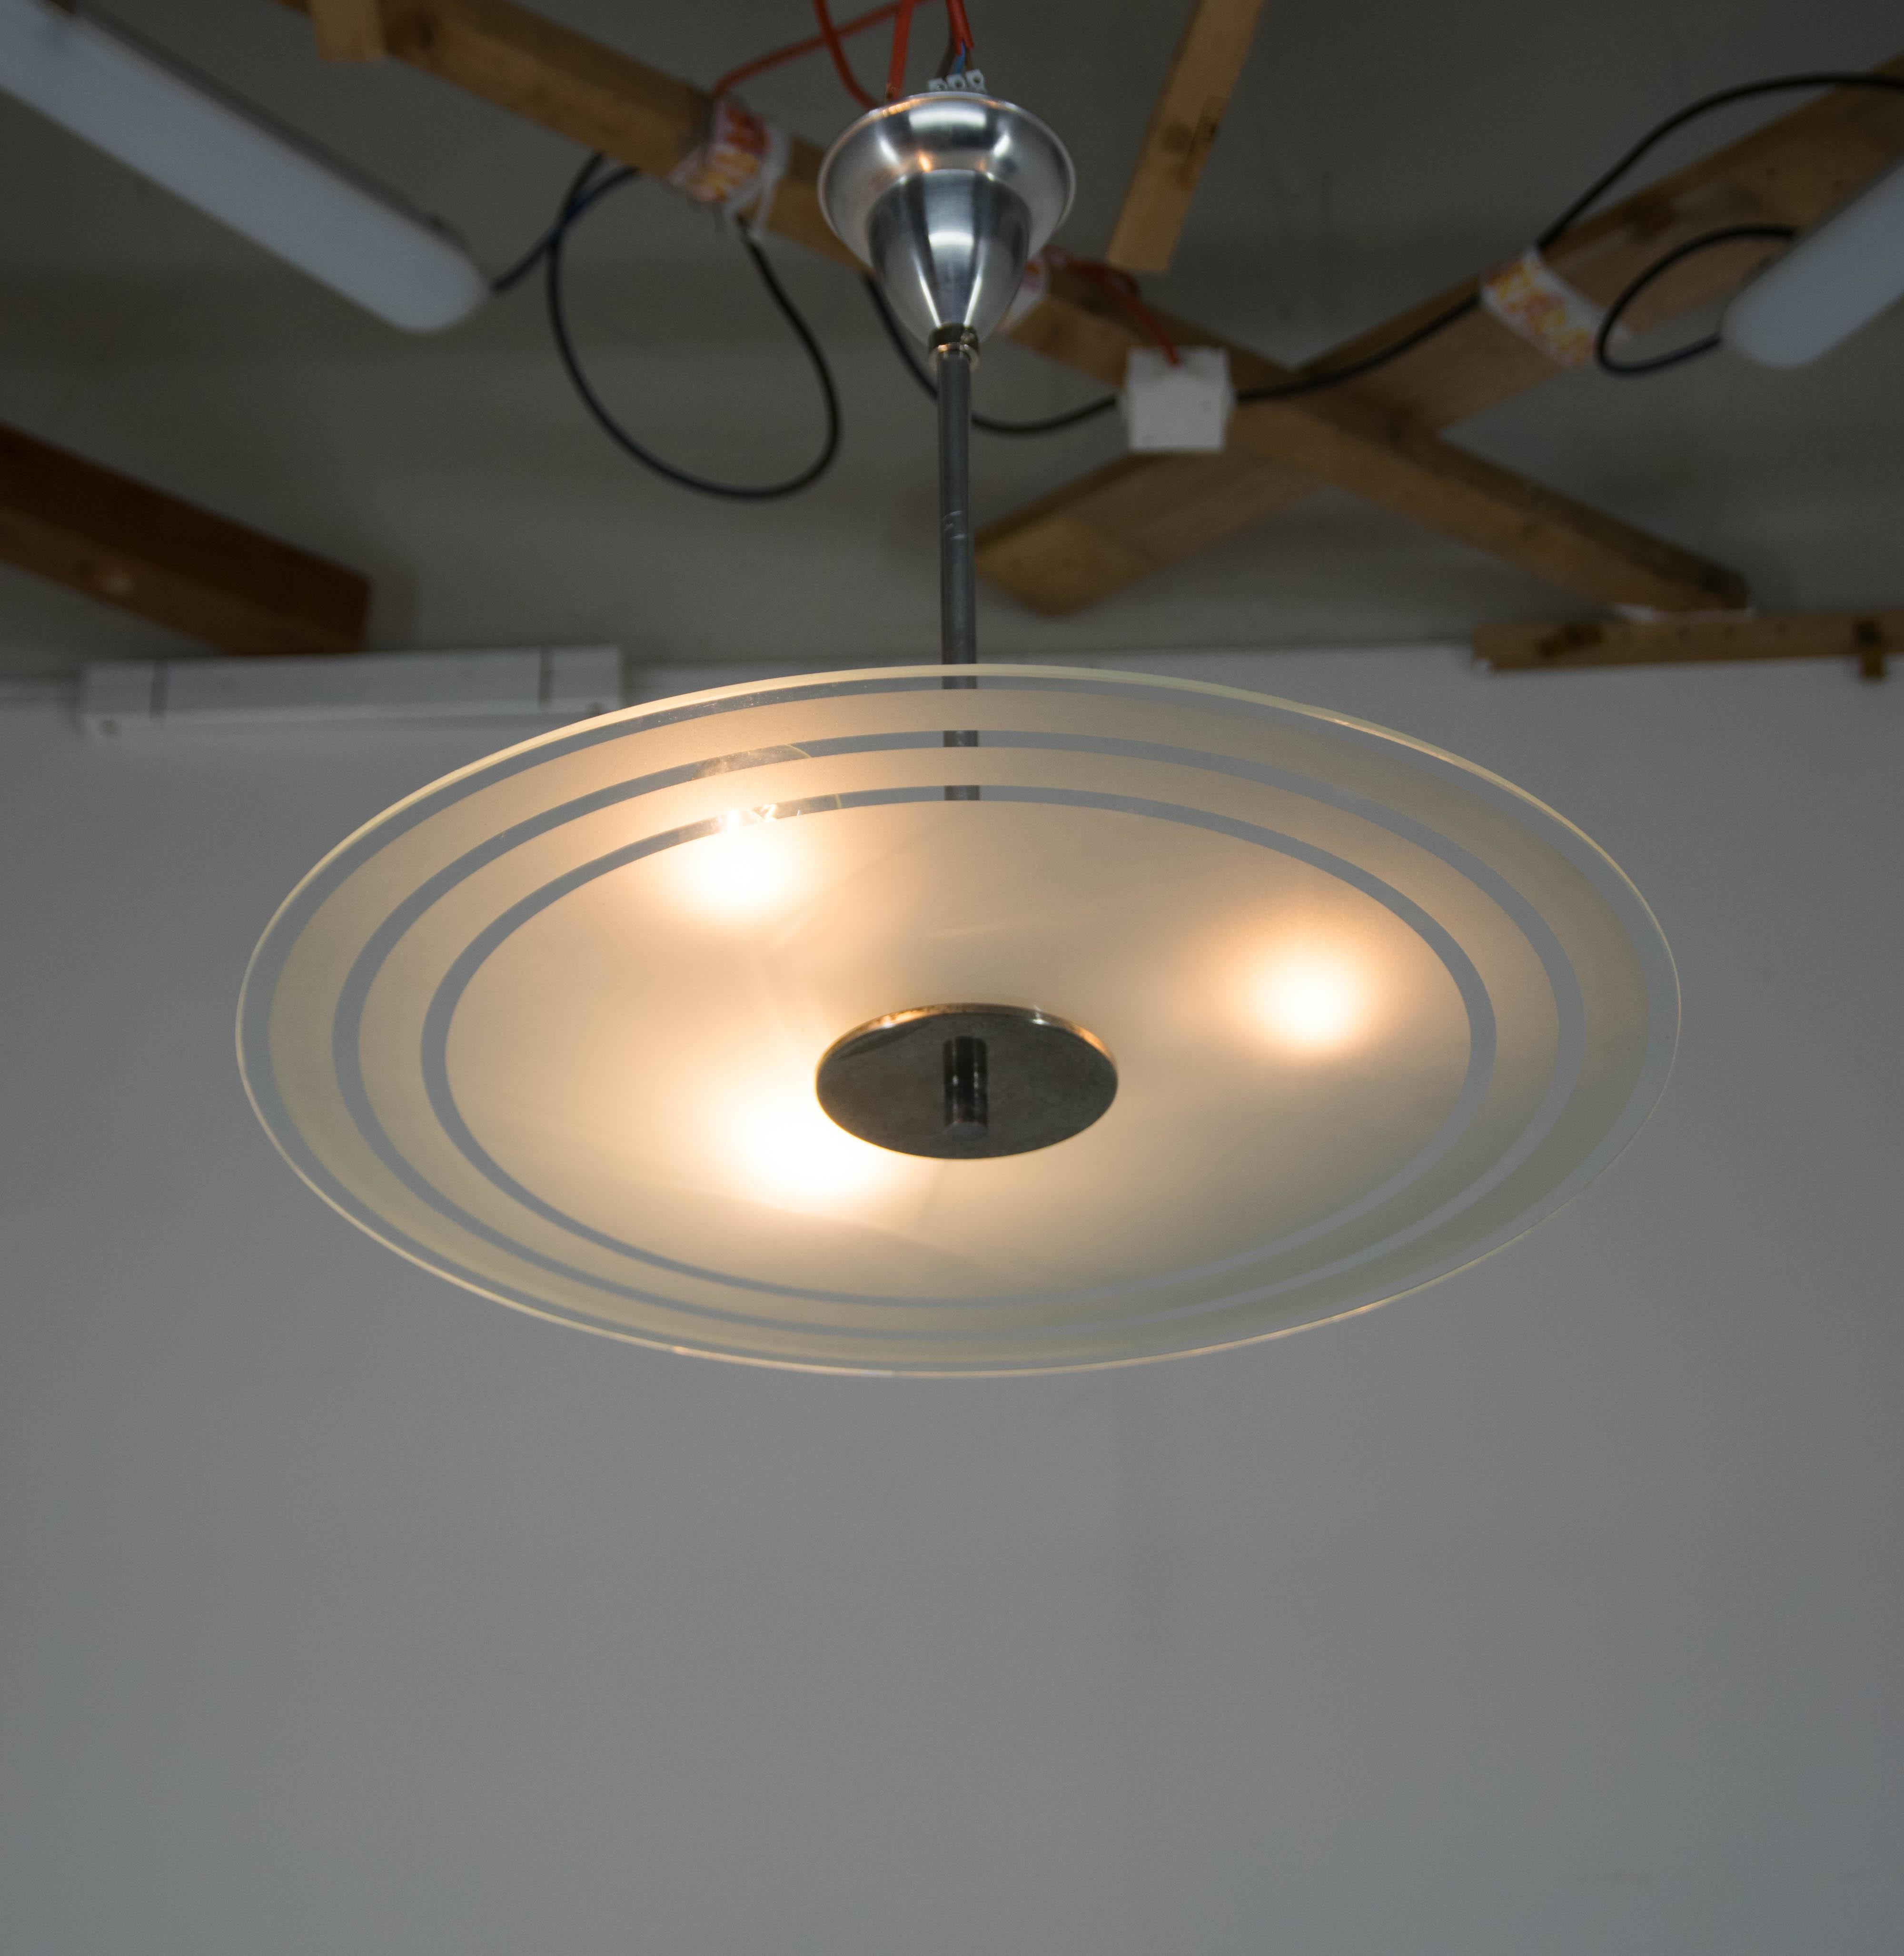 Czech Bauhaus or Functionalist Chandelier, 1930s For Sale